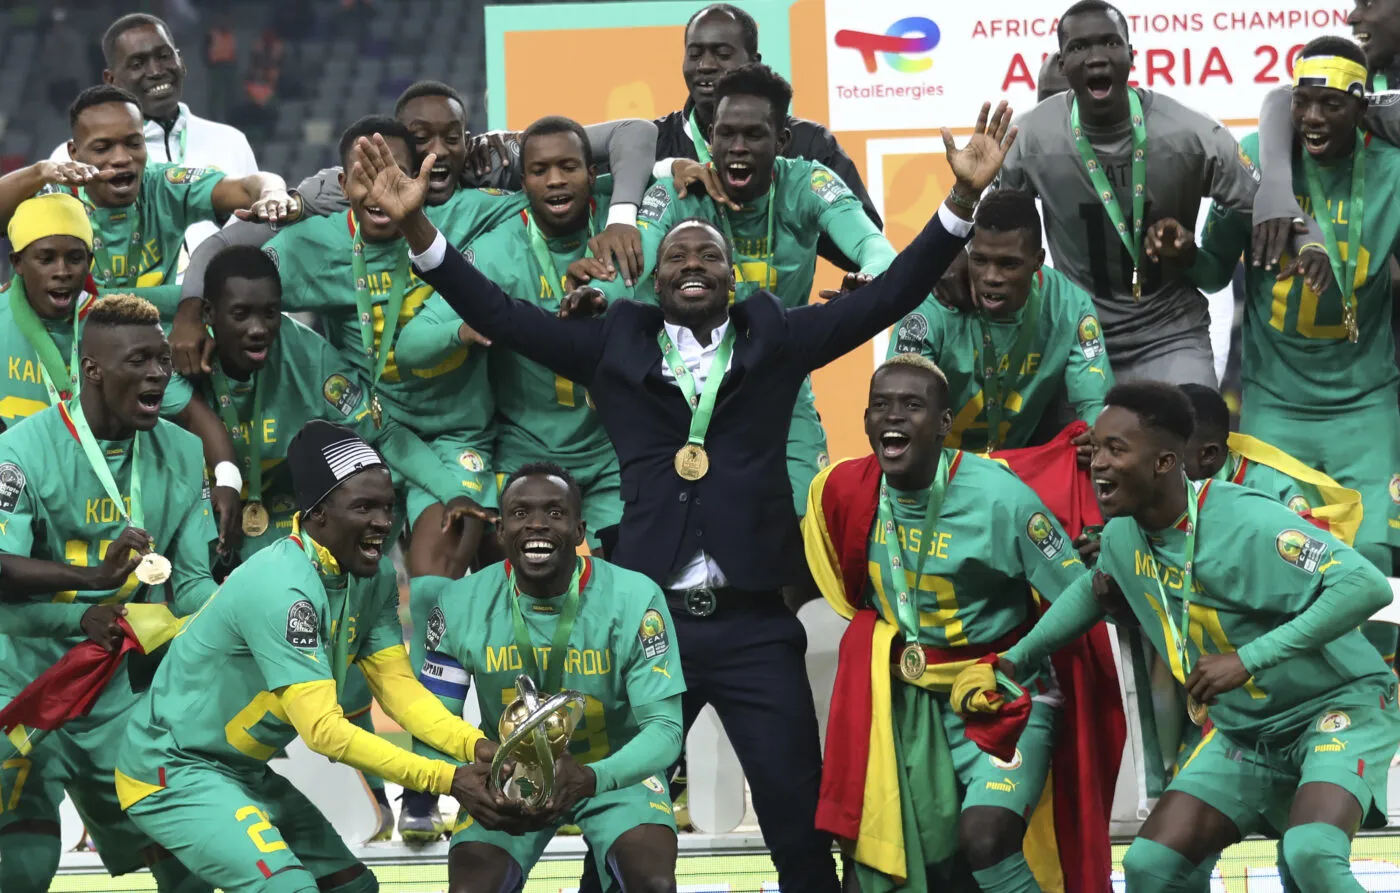 Elhadji Balde Moutarou and Pape Thiaw, coach of Senegal (c) celebrates victory with trophy during 2022 CAF African Nations Championship Final football match between Algeria and Senegal at the Nelson Mandela Stadium in Algiers, Algeria on 04 February 2023 ©Gavin Barker/Sports Inc - Photo by Icon sport